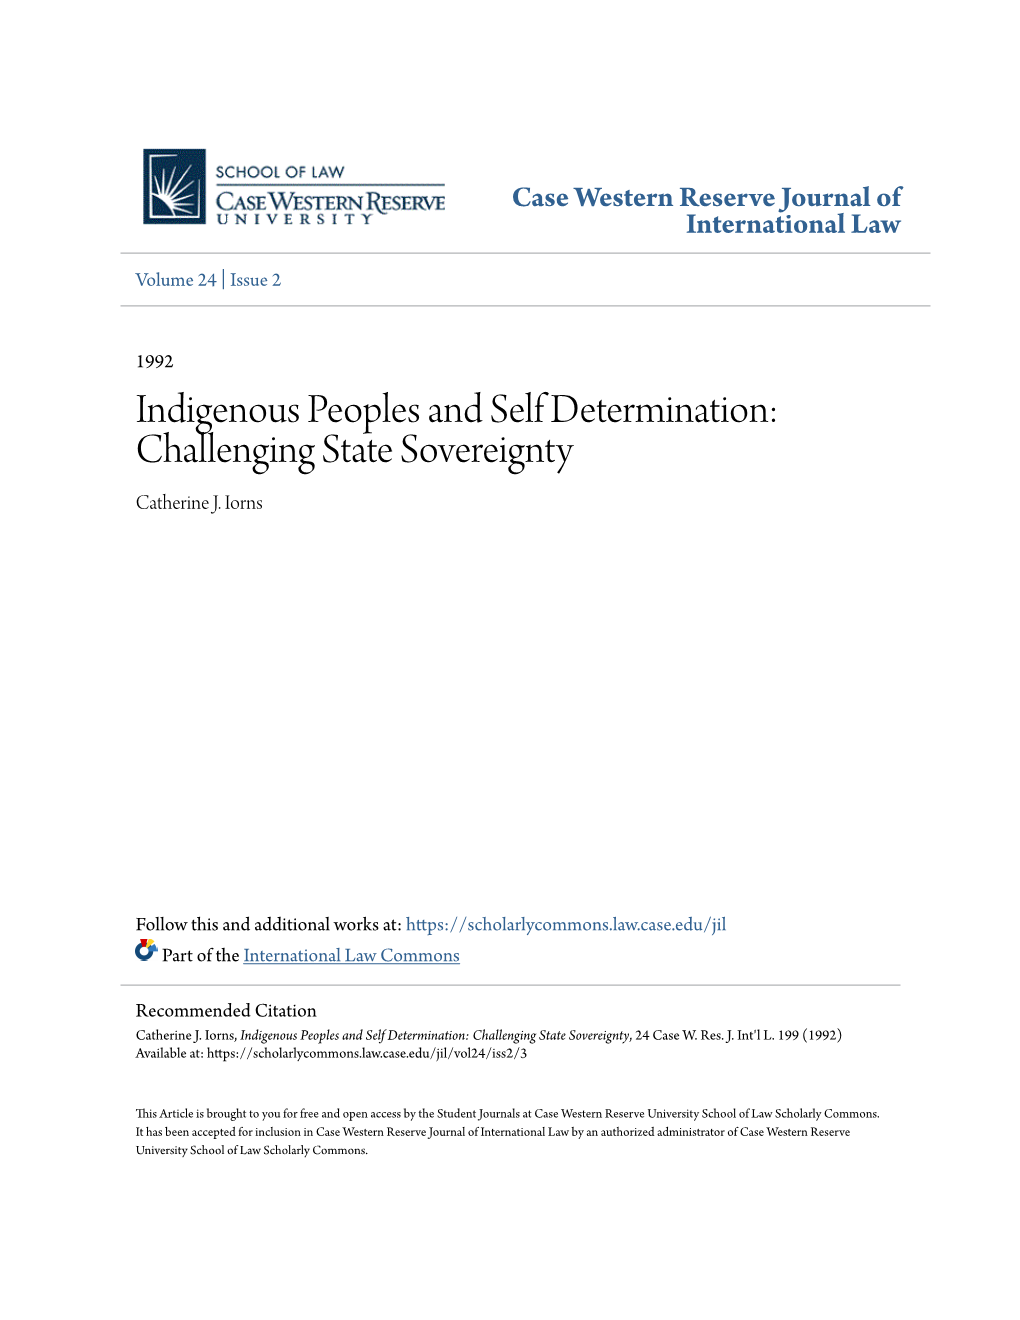 Indigenous Peoples and Self Determination: Challenging State Sovereignty Catherine J